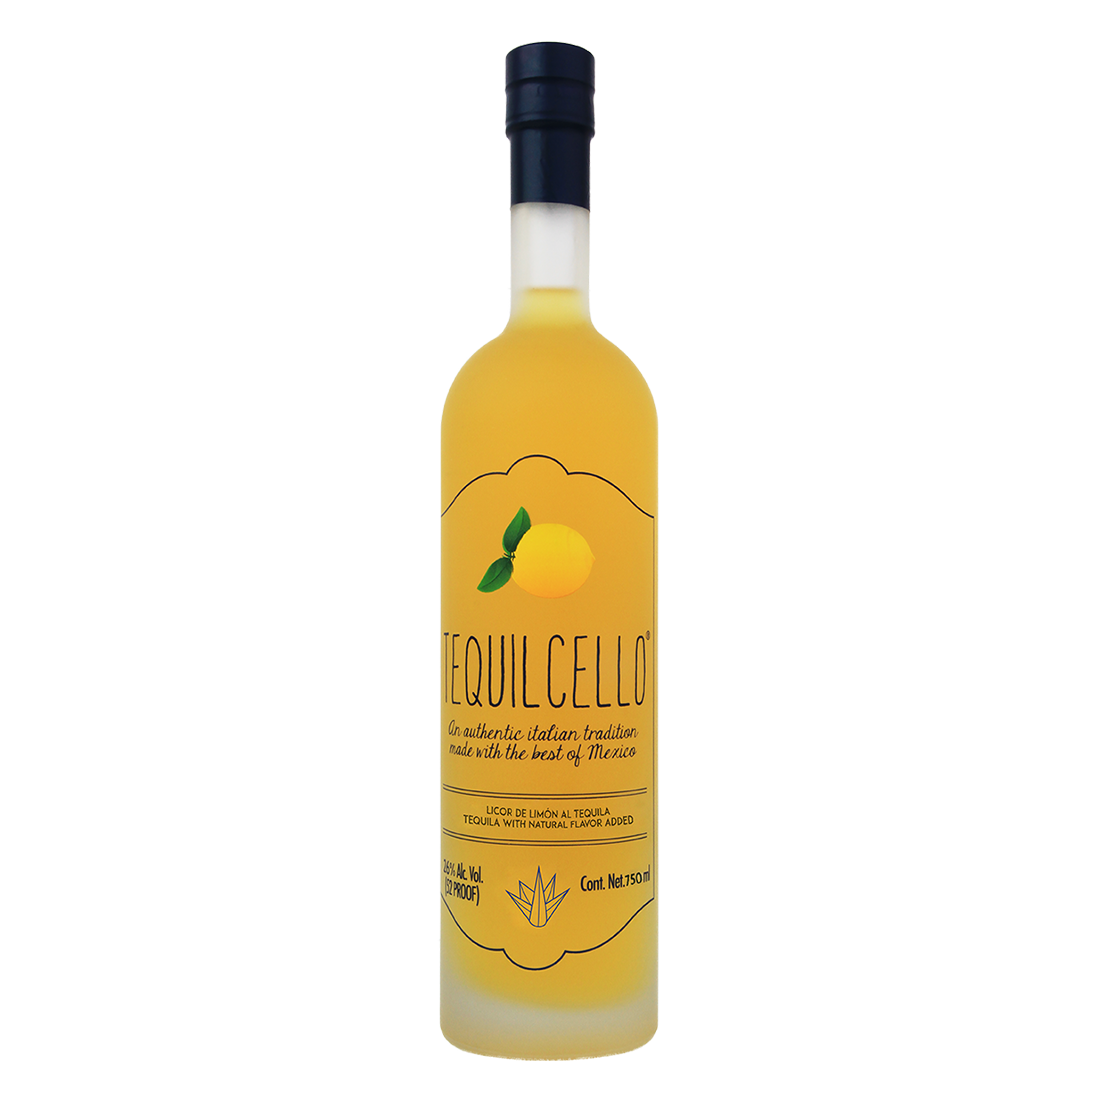 Tequilcello